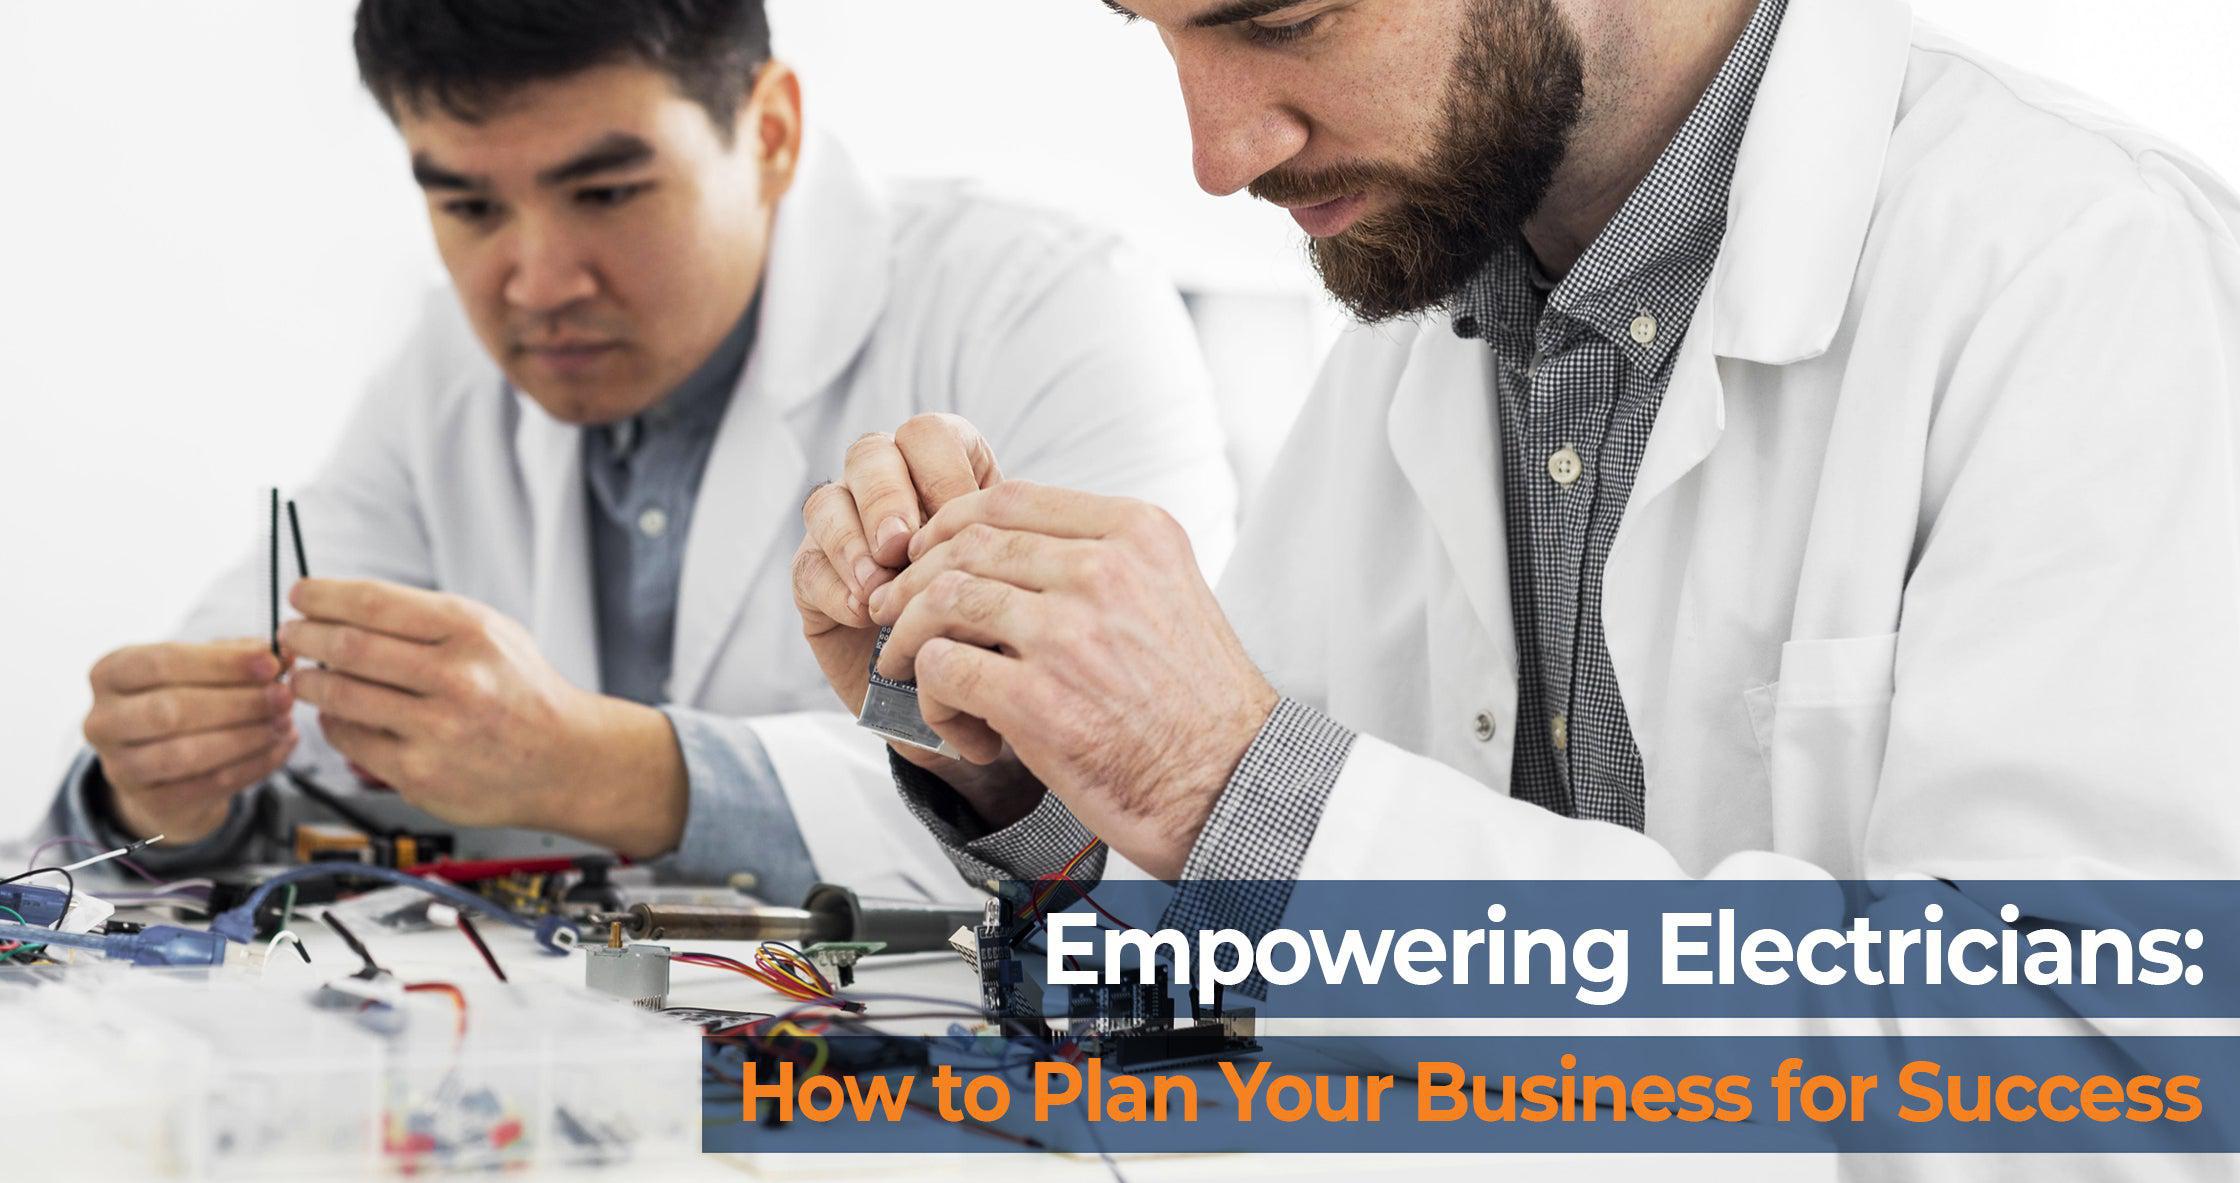 Empowering Electricians: How to Plan Your Business for Success